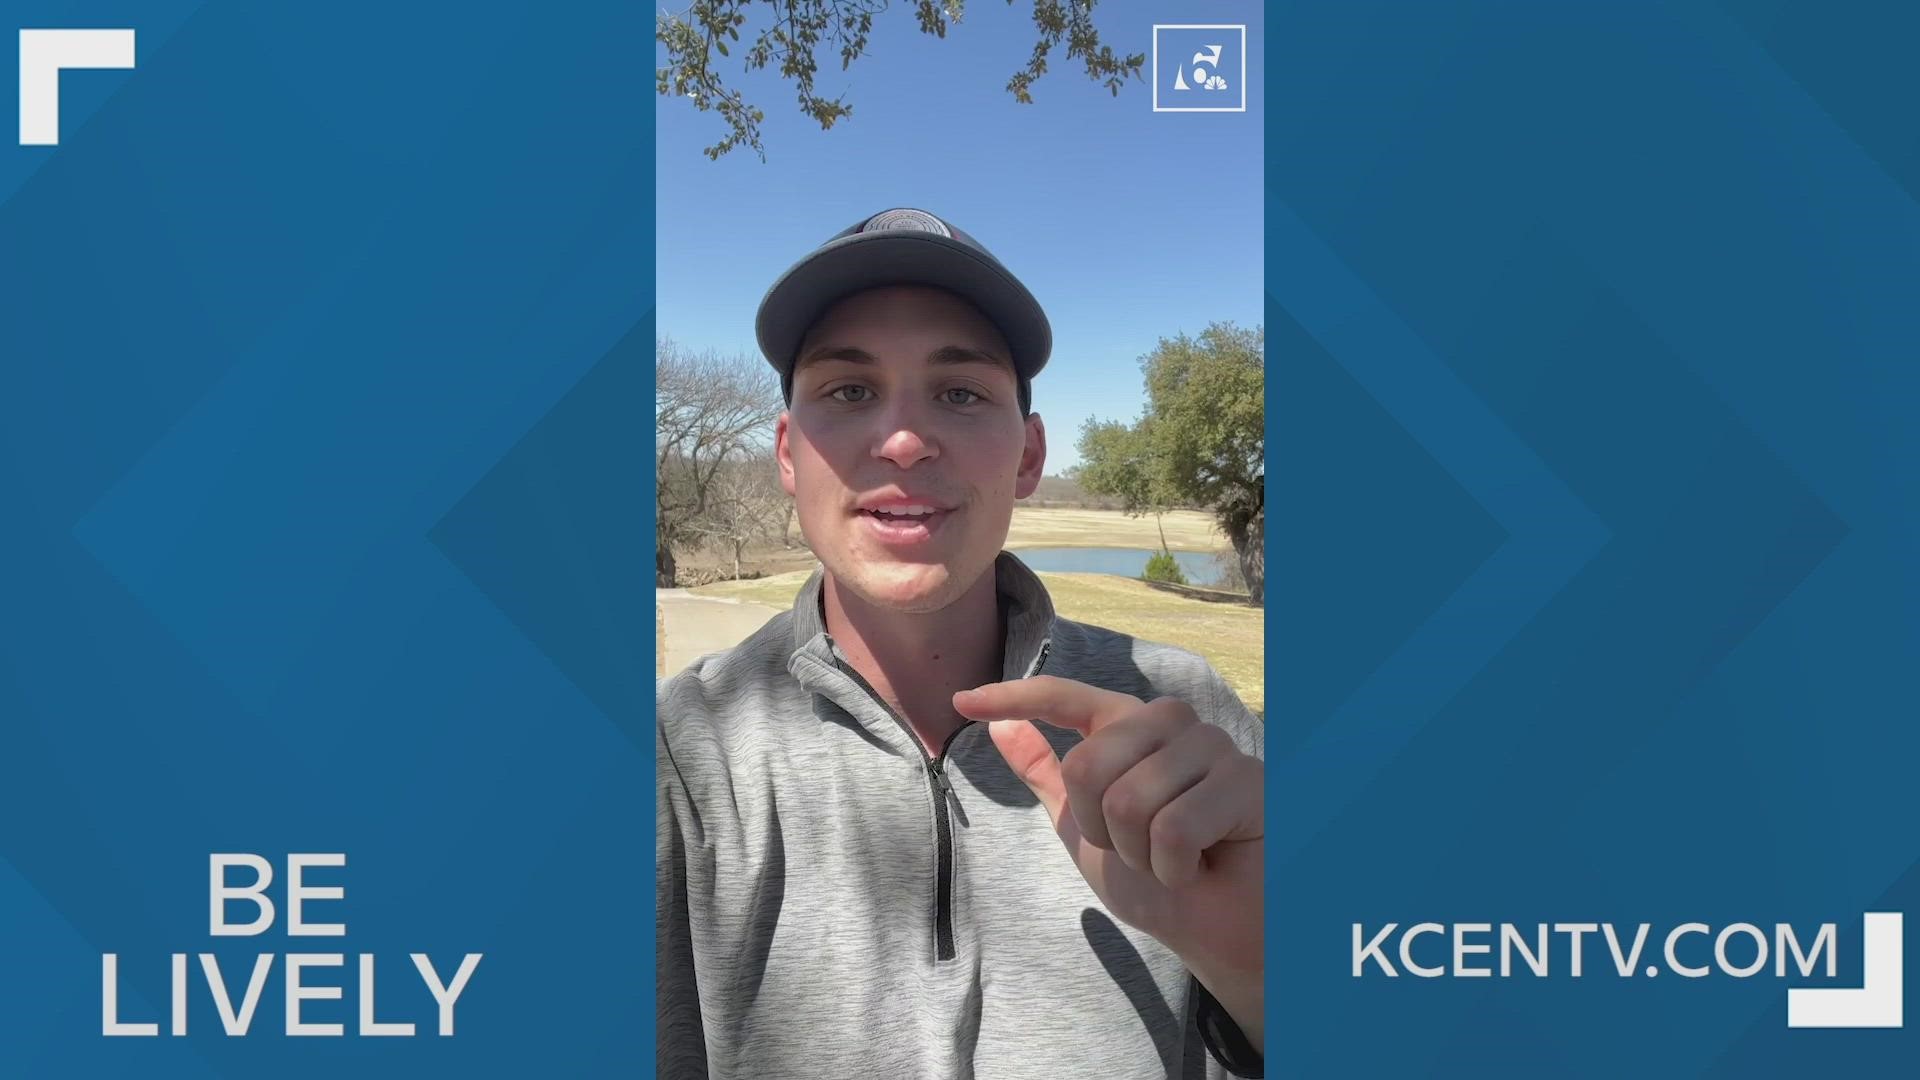 It's the perfect time to hit the links, Matt Lively shows us a couple of the most popular courses in Central Texas and the perks of them.